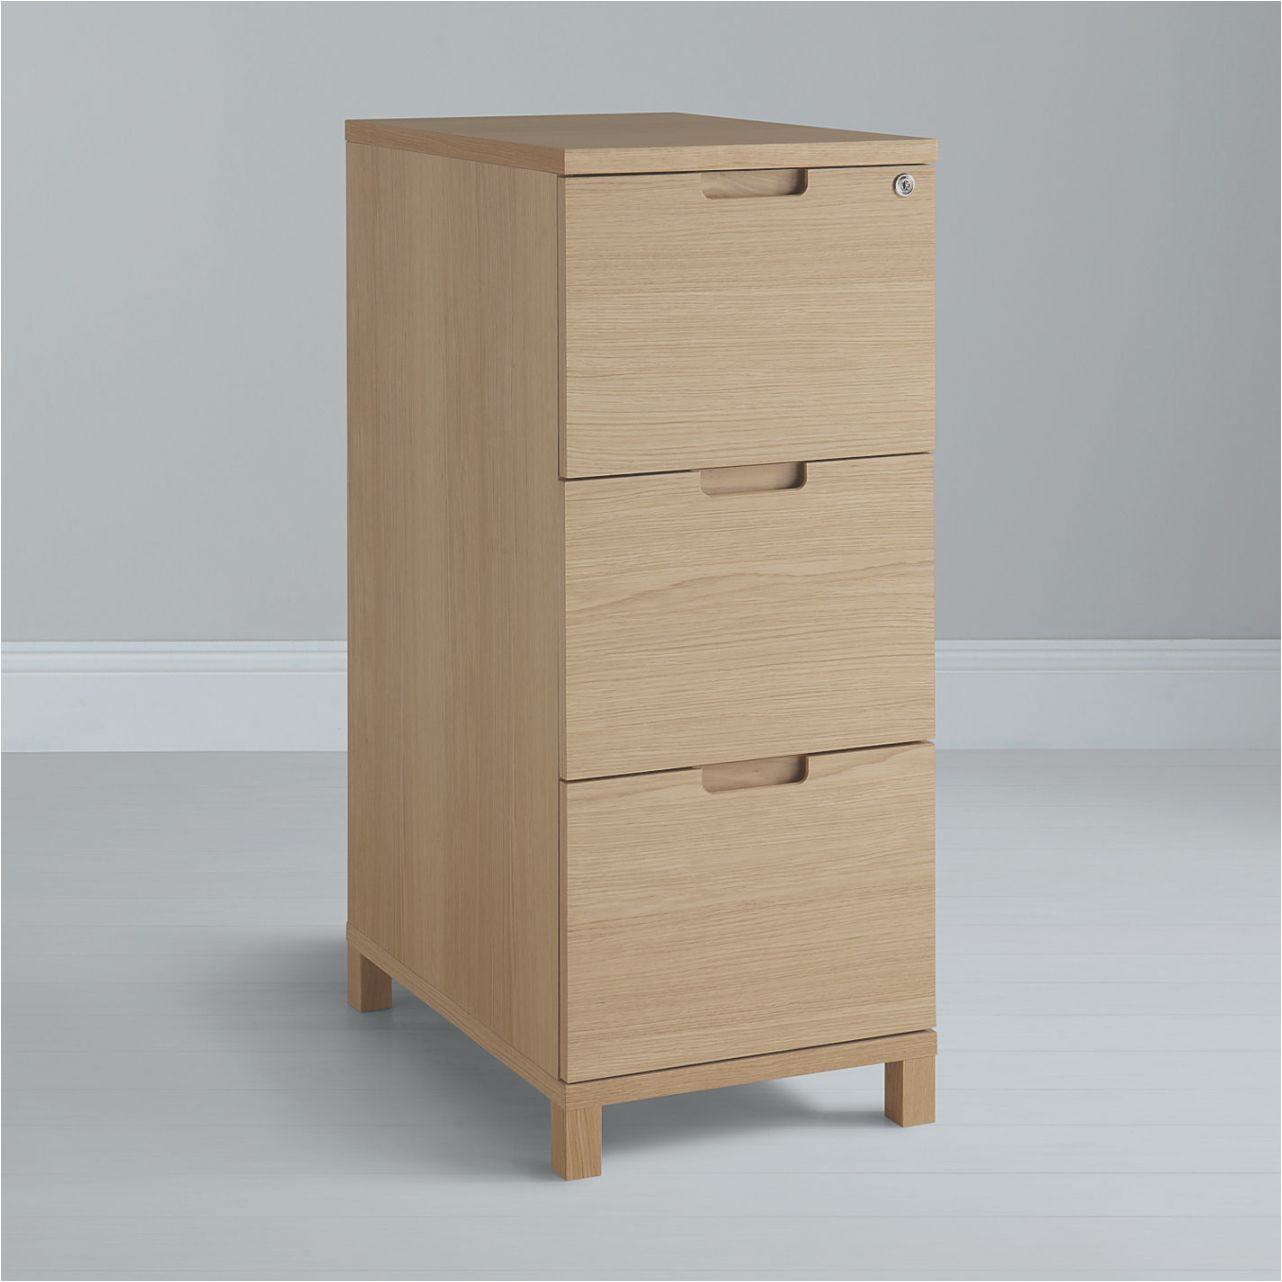 50 Unique Two Drawer Wood Filing Cabinets Atmosphere Two Drawer within size 1282 X 1282